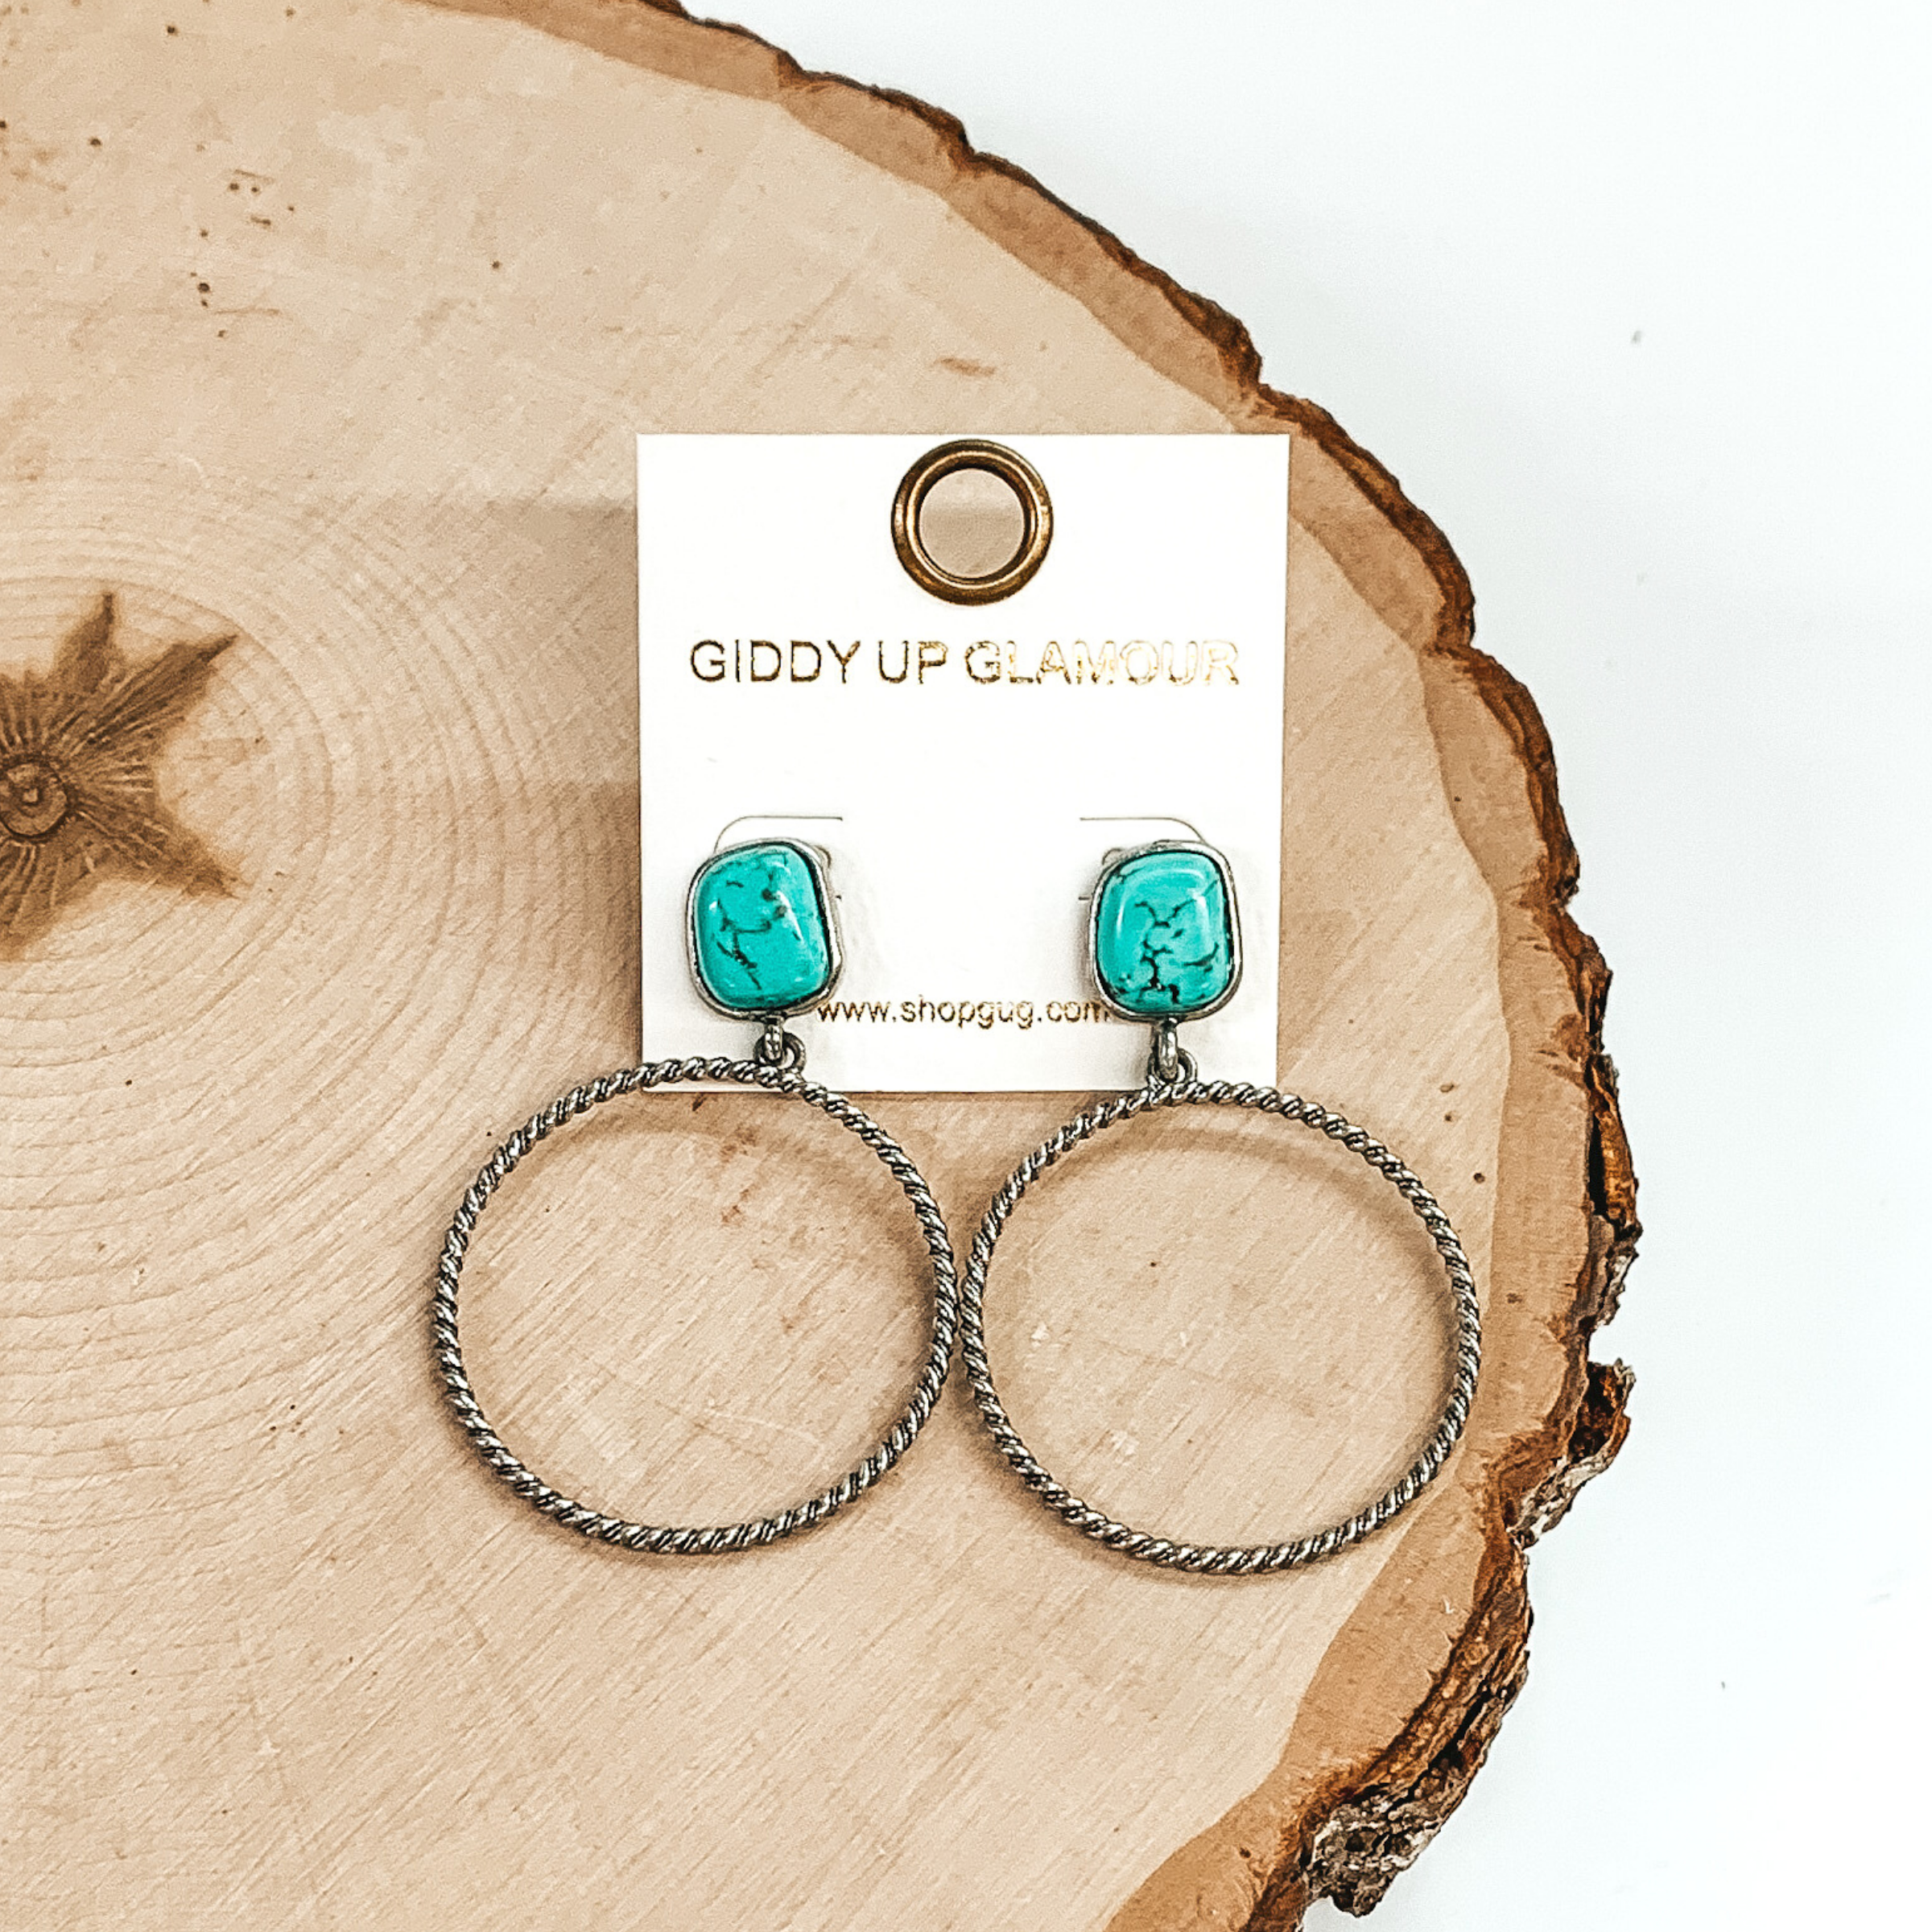 Rounded, square stone stud earrings in turquoise with a silver, twisted open circle pendant hanging from the bottom. These earrings are pictured on a piece of wood on a white background. 